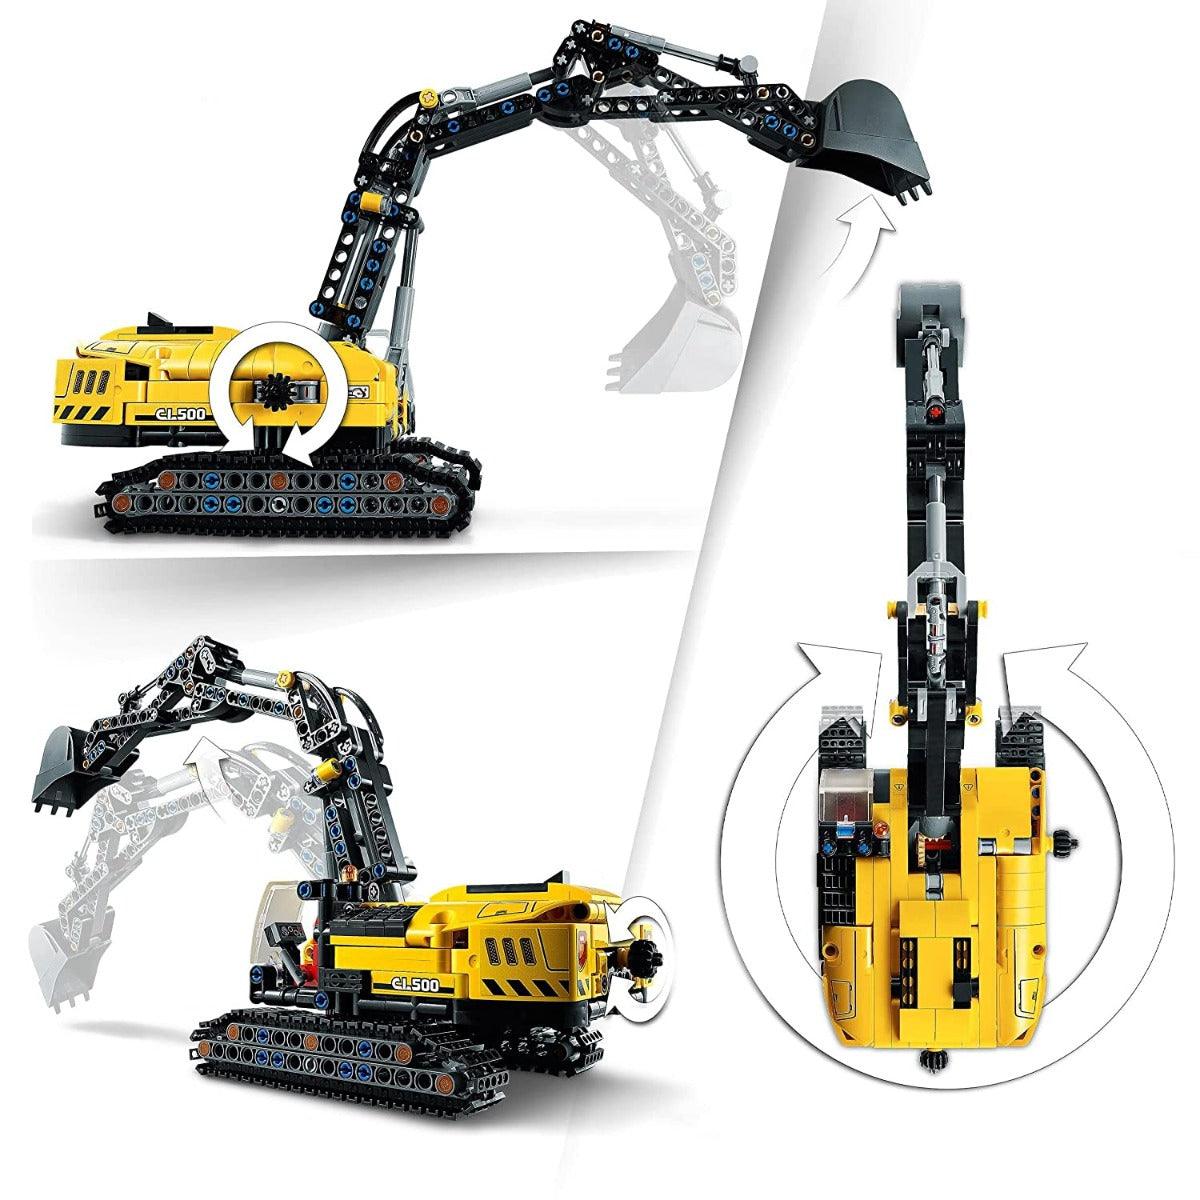 Lego Technic Heavy-Duty 2in1 Excavator Building Kit for Ages 8+